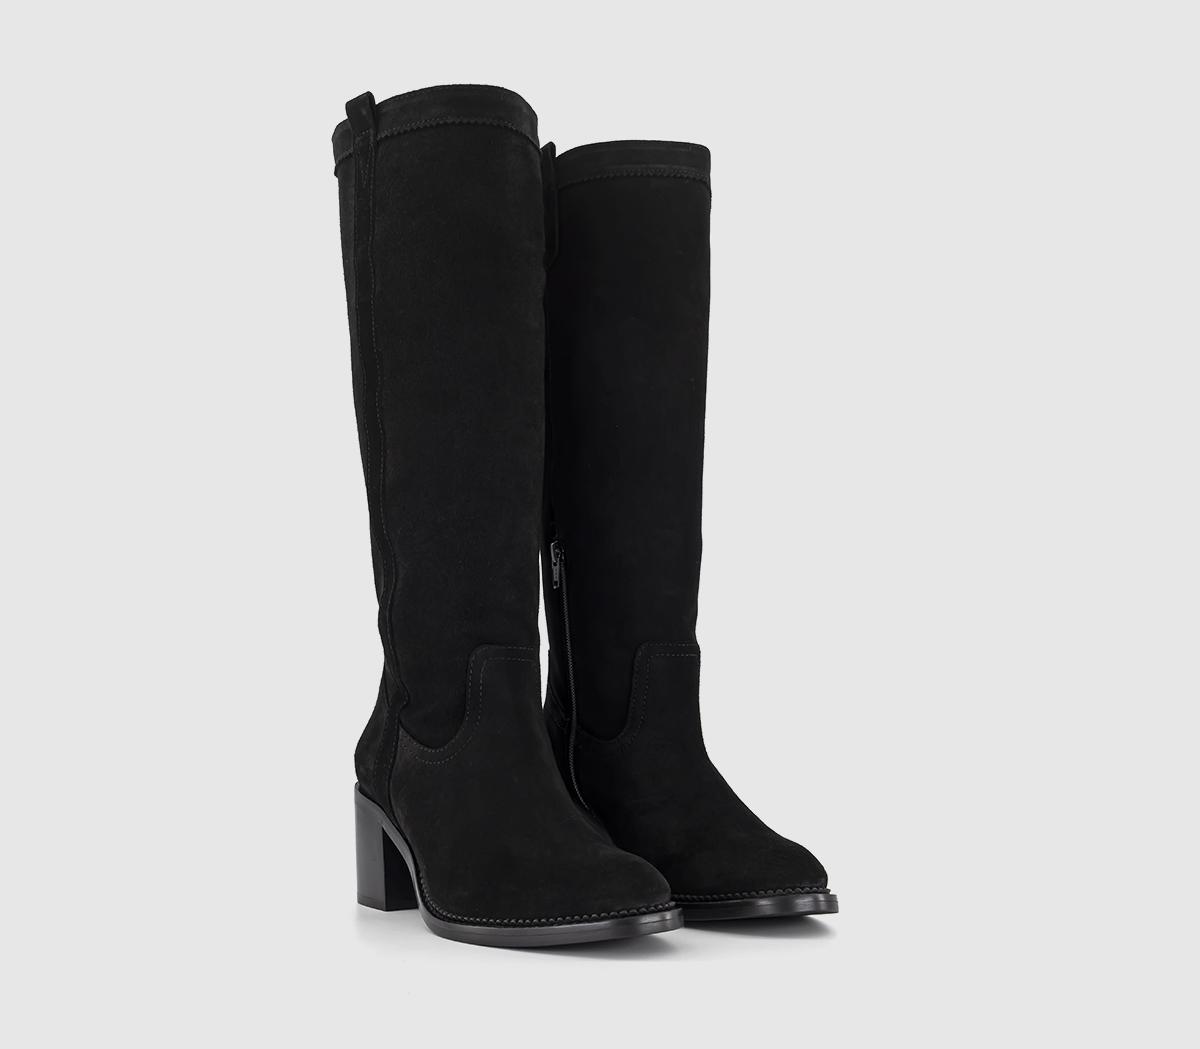 OFFICE Womens Knockout Heeled Knee High Boots Black Suede, 4